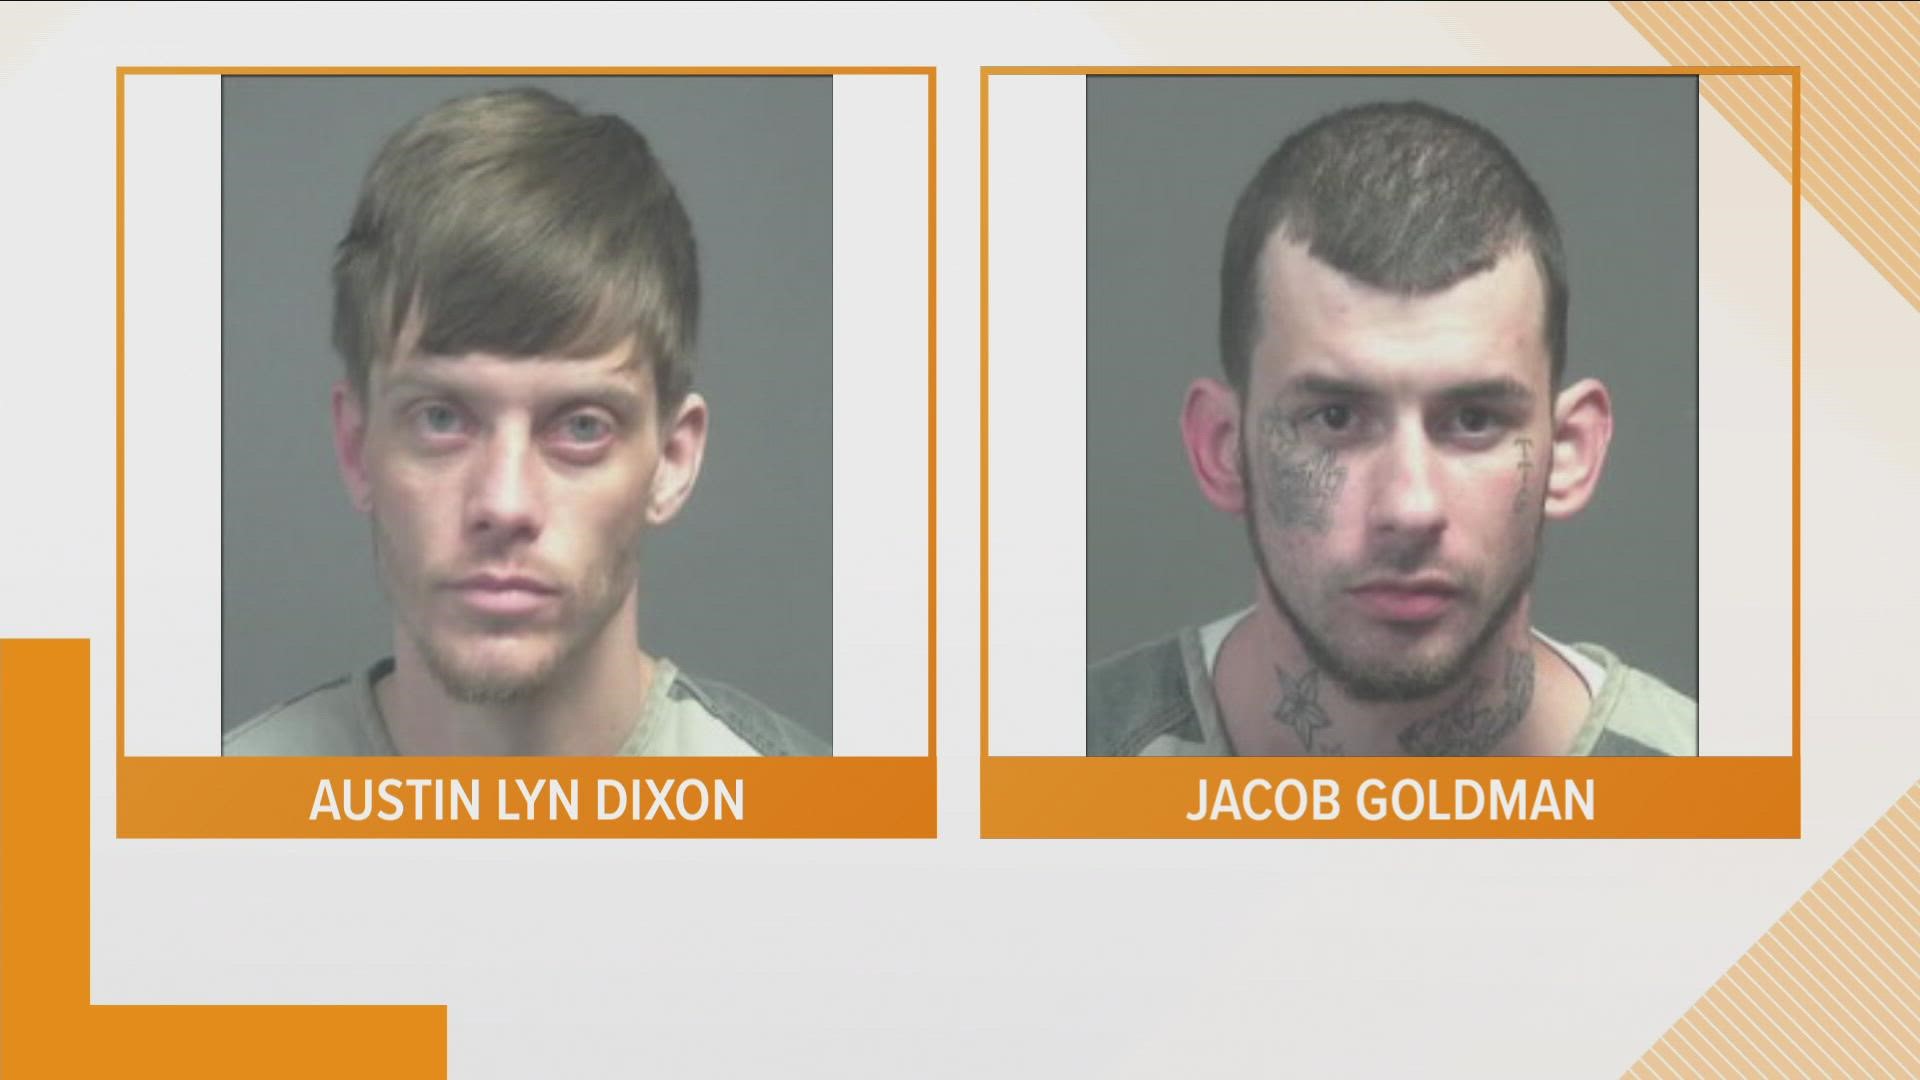 The driver, Jacob Goldman, was arrested while the passenger, Austin Lyn Dixon, attempted to run from deputies before being arrested.